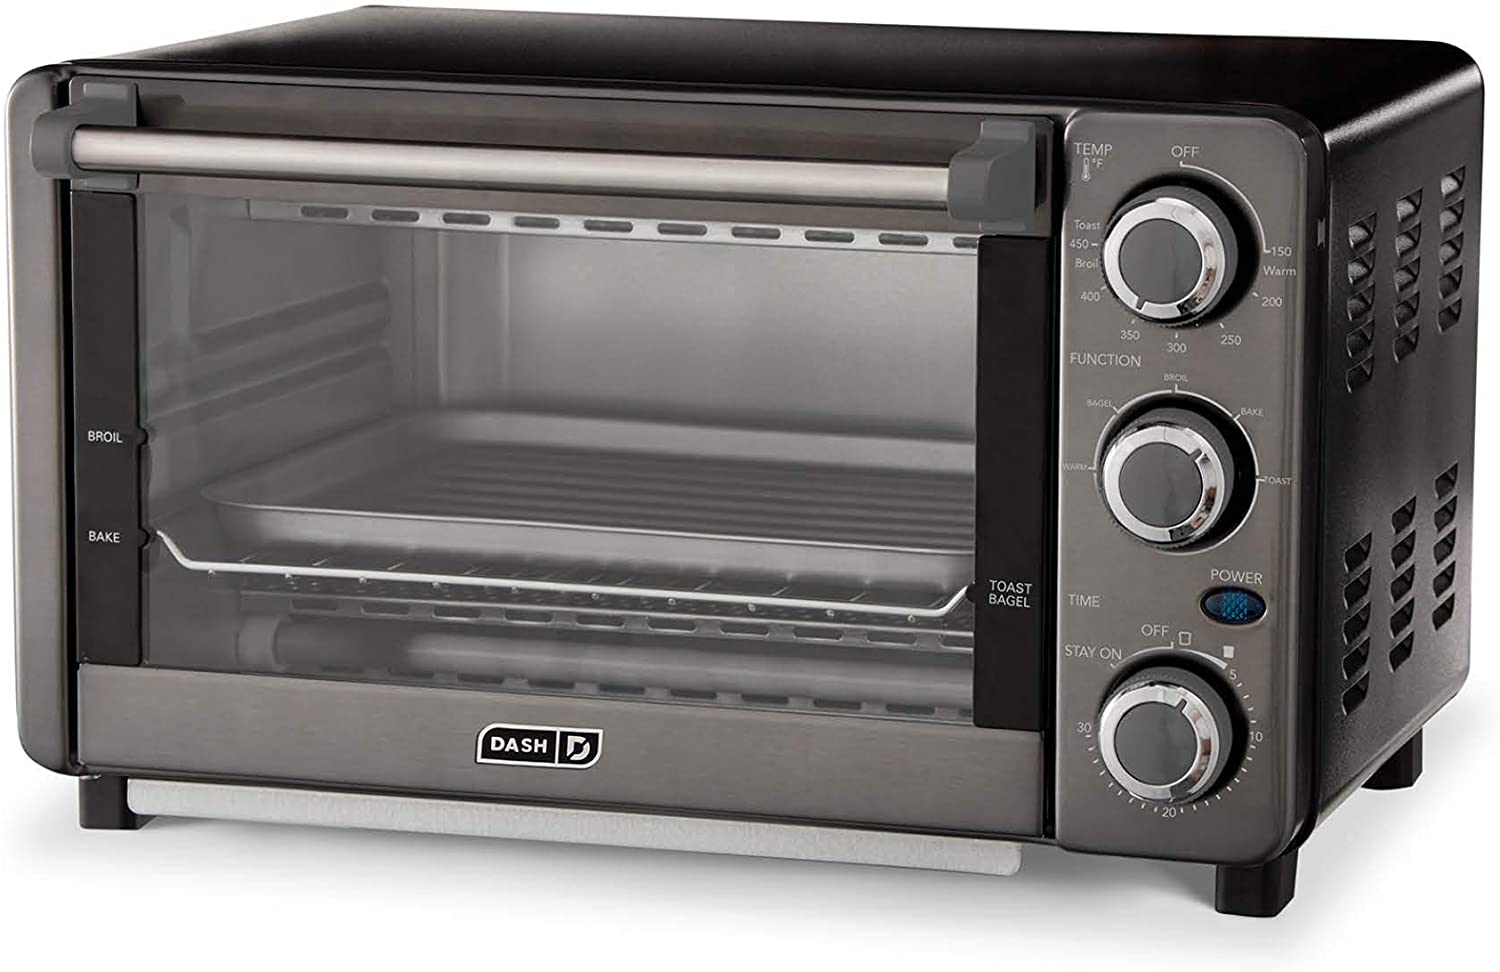 Dash Express Countertop Toaster Oven with Quartz Technology